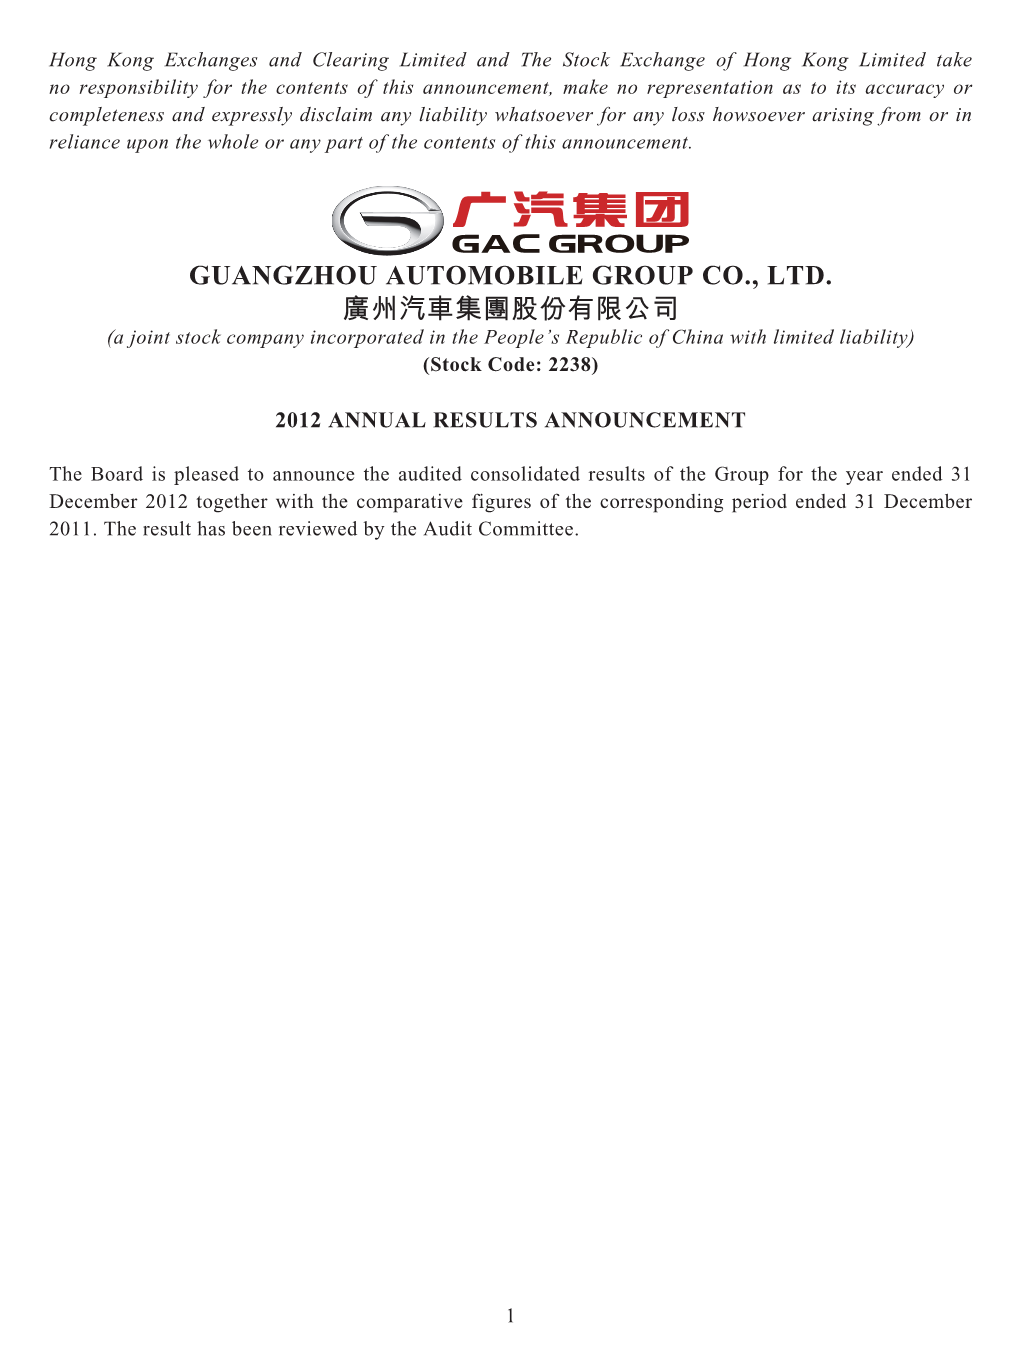 GUANGZHOU AUTOMOBILE GROUP CO., LTD. 廣州汽車集團股份有限公司 (A Joint Stock Company Incorporated in the People’S Republic of China with Limited Liability) (Stock Code: 2238)